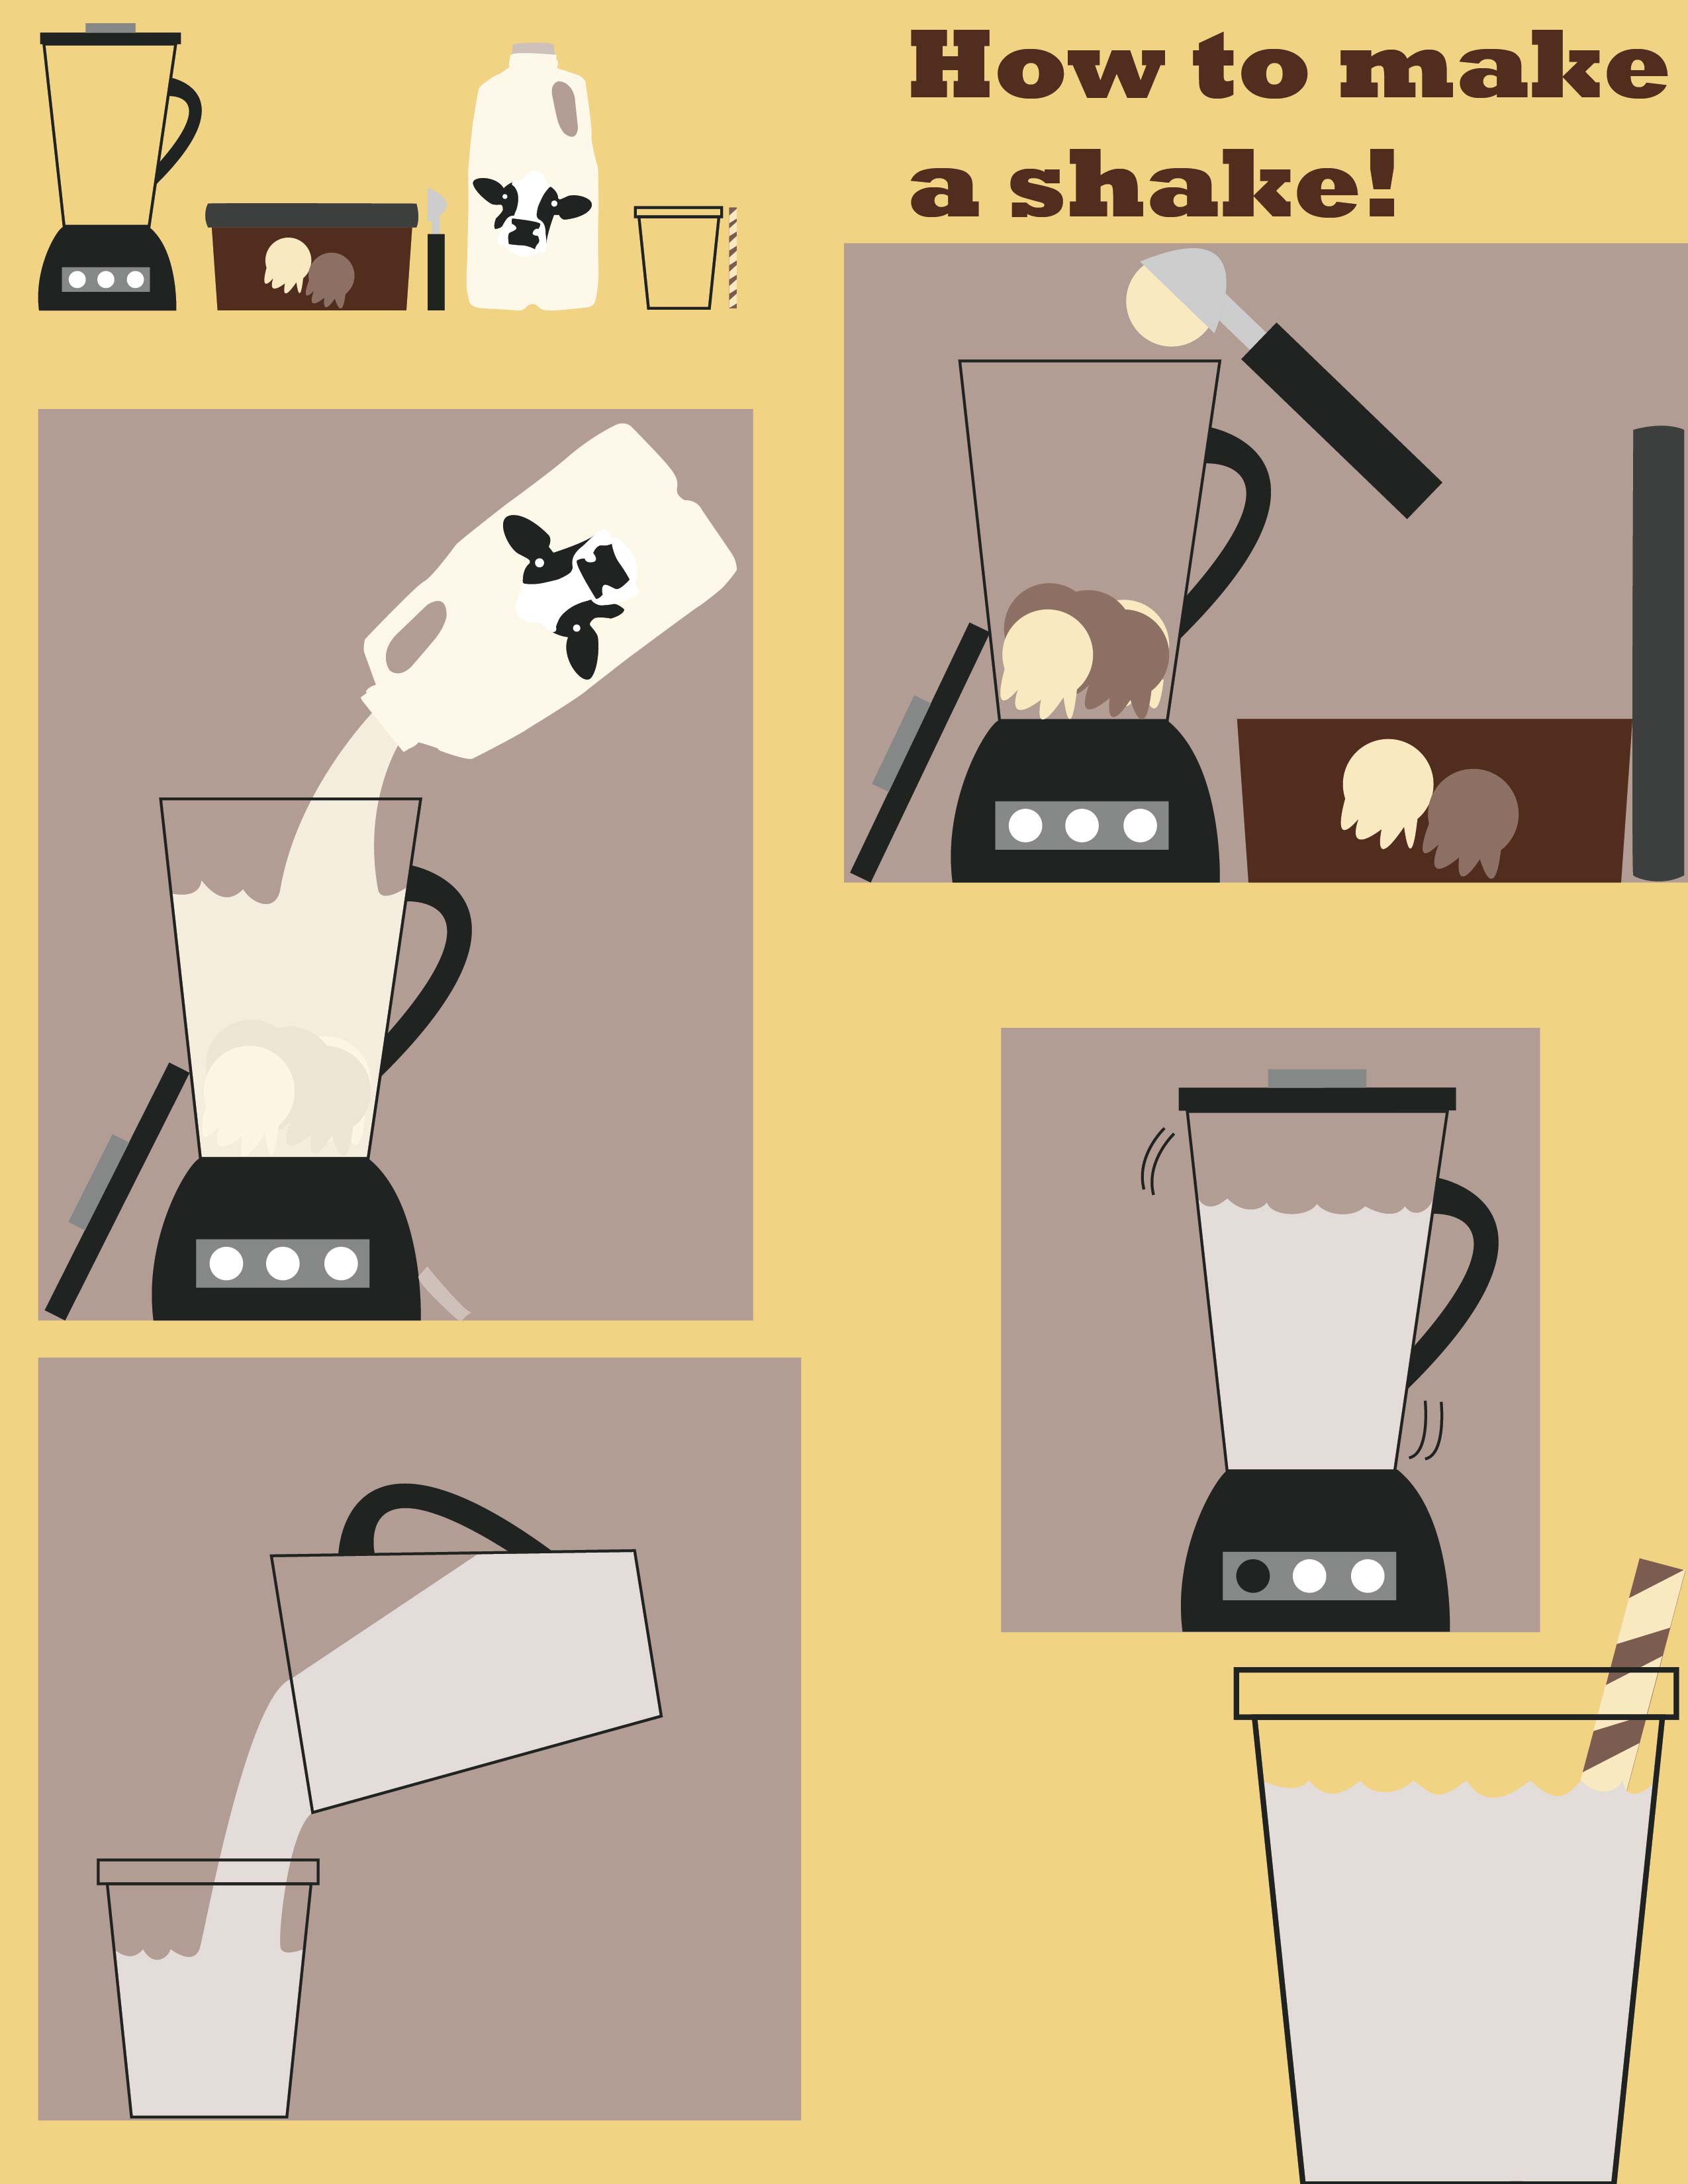 An illustrated guide on how to make a shake.